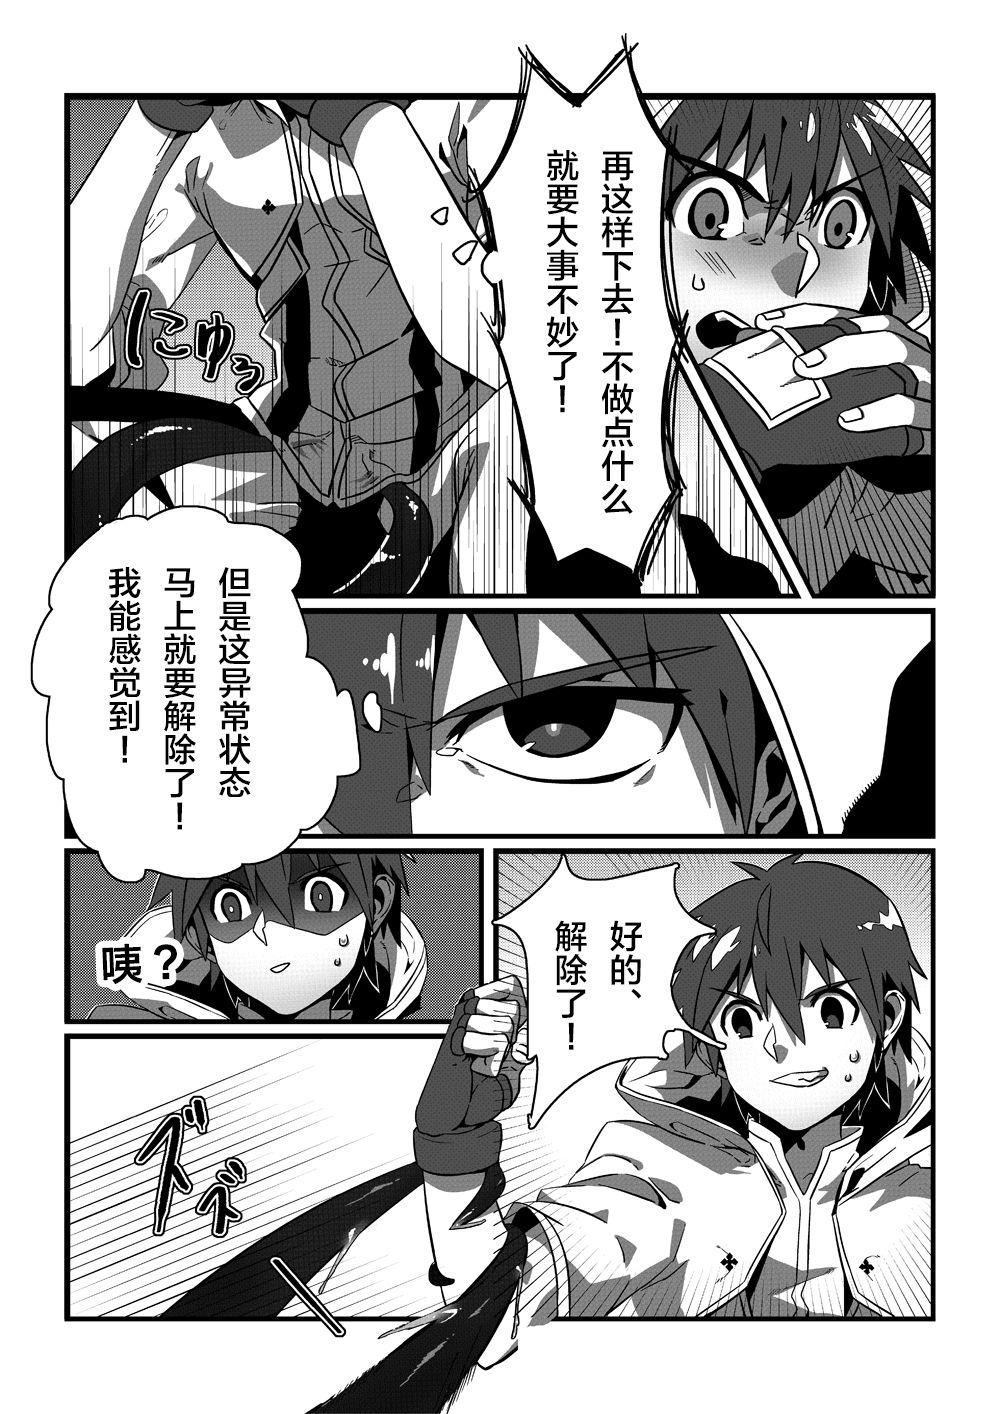 Blowjob Shintou - PENETRATION - Dungeon fighter online Gay Cut - Page 9